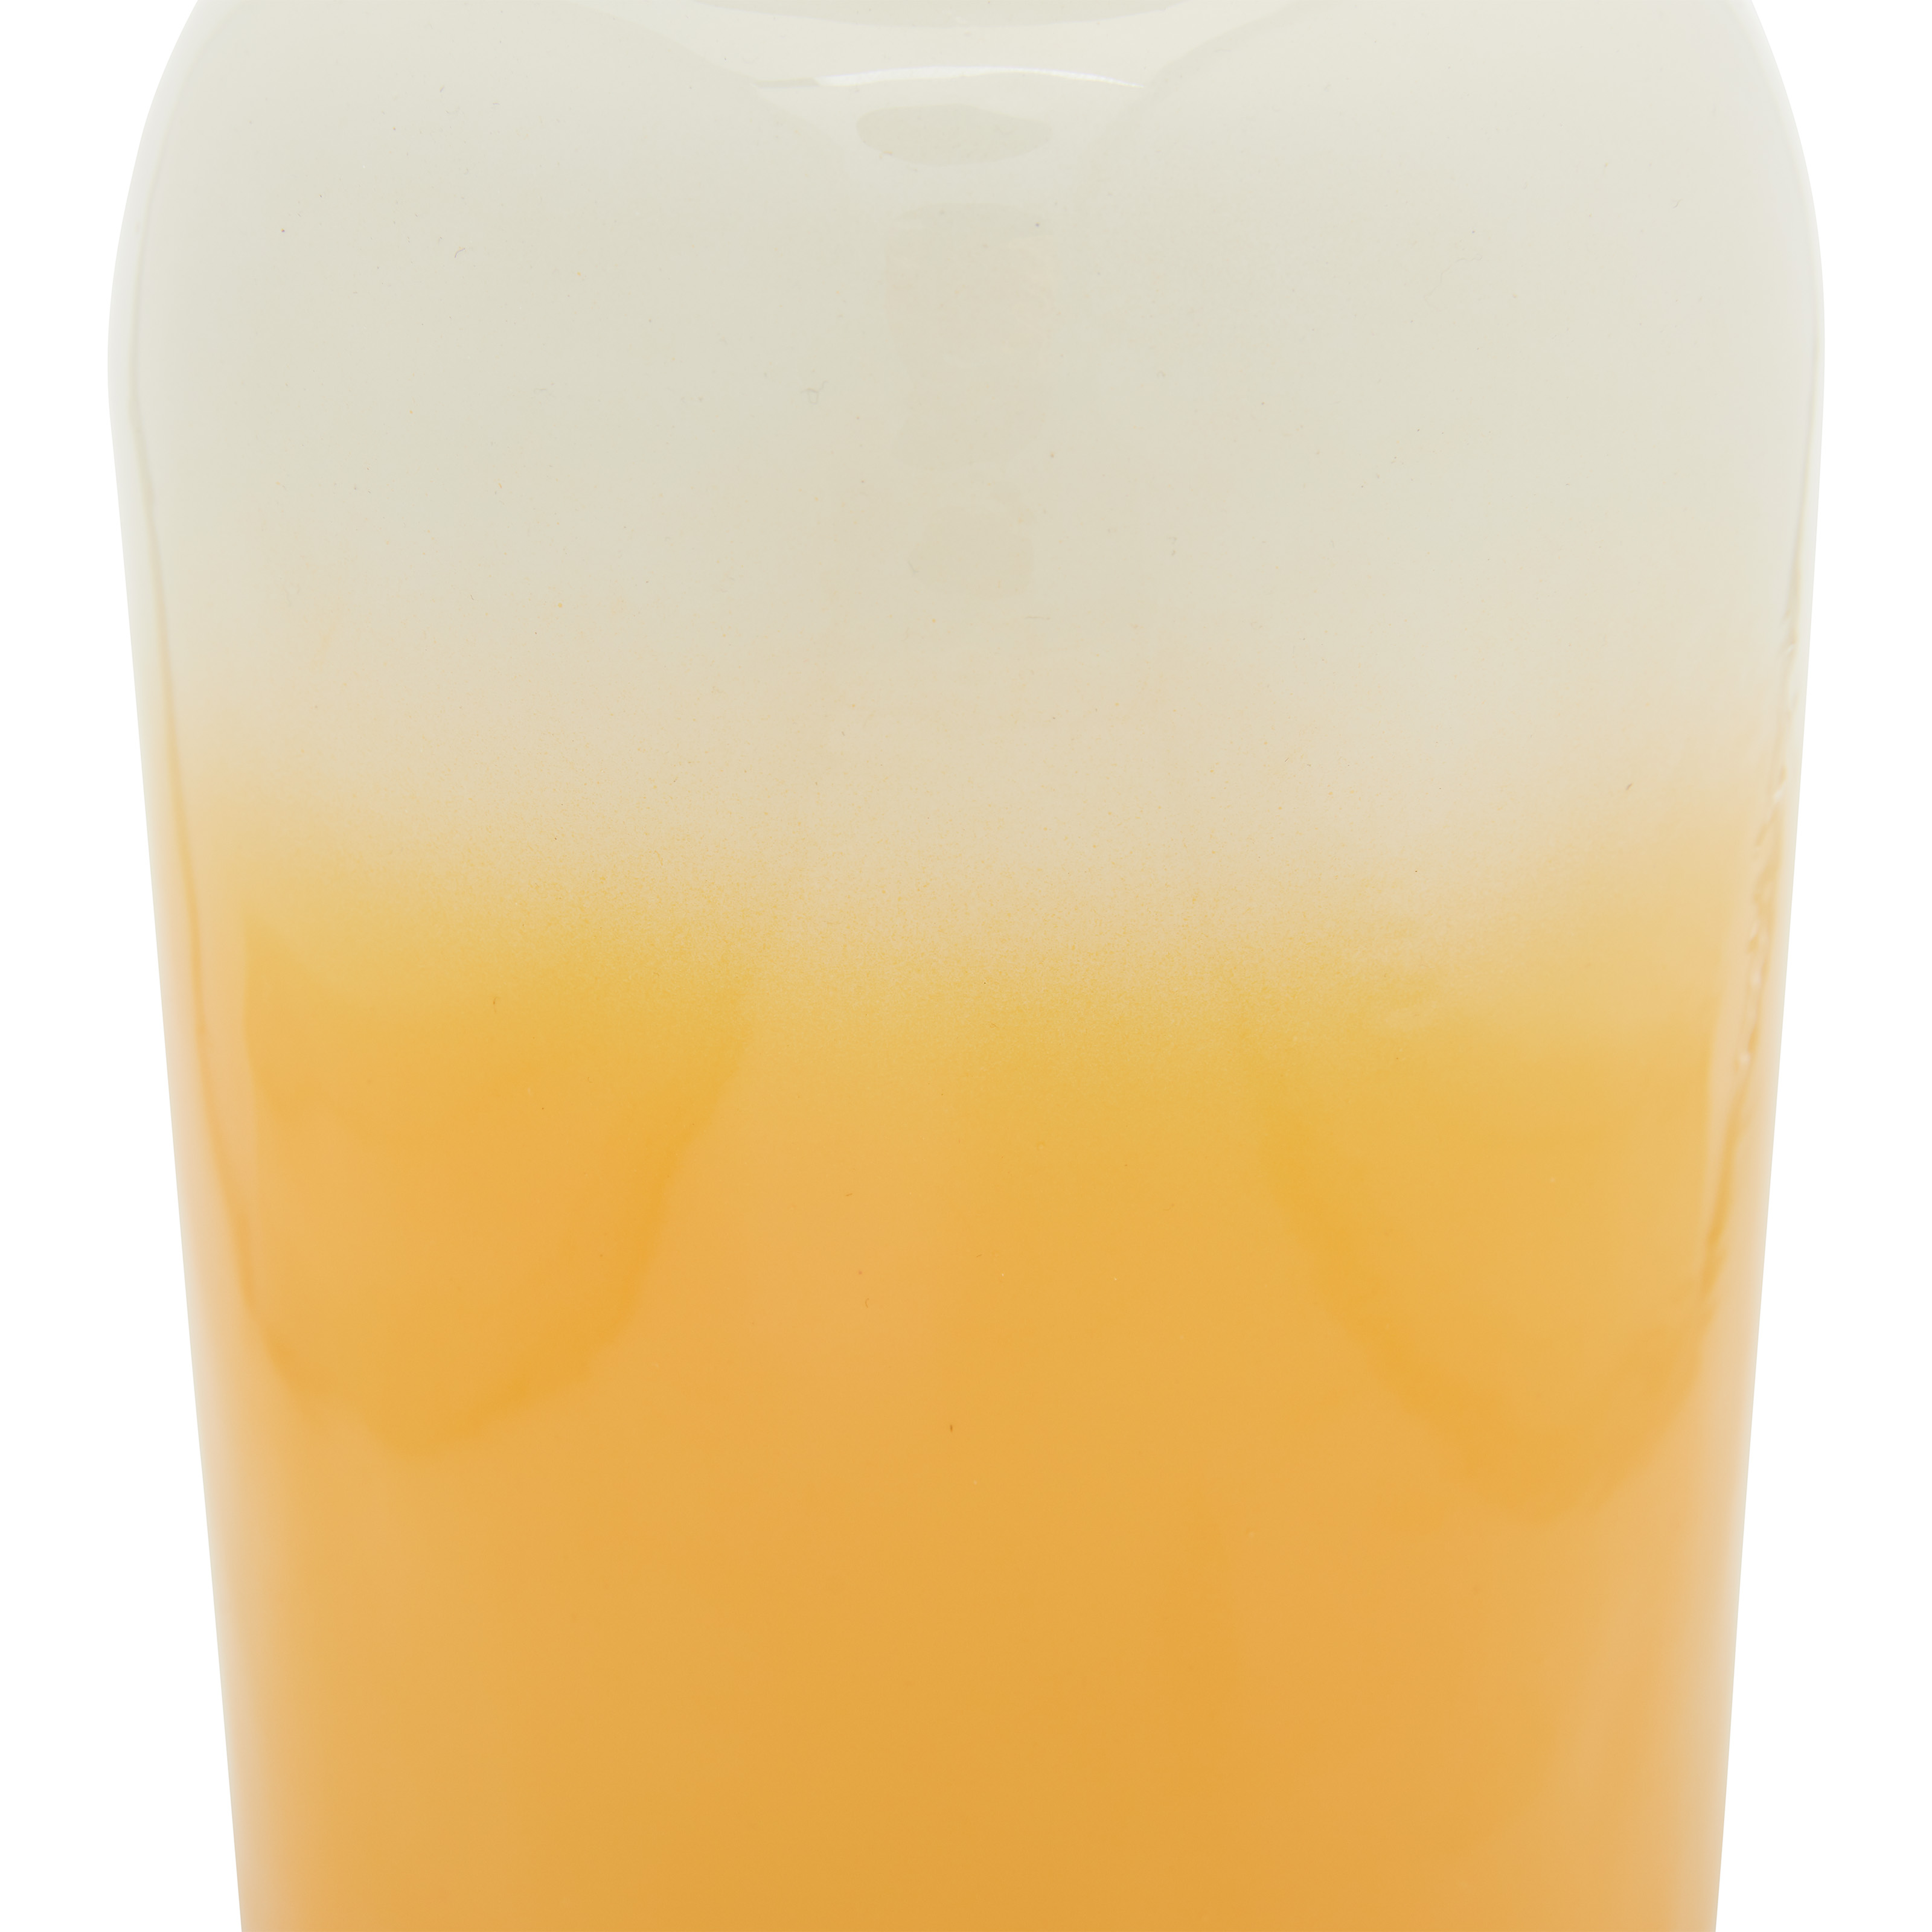 Sahara Gold Ombre Decorative Bottle by Drew Barrymore Flower Home - image 3 of 5